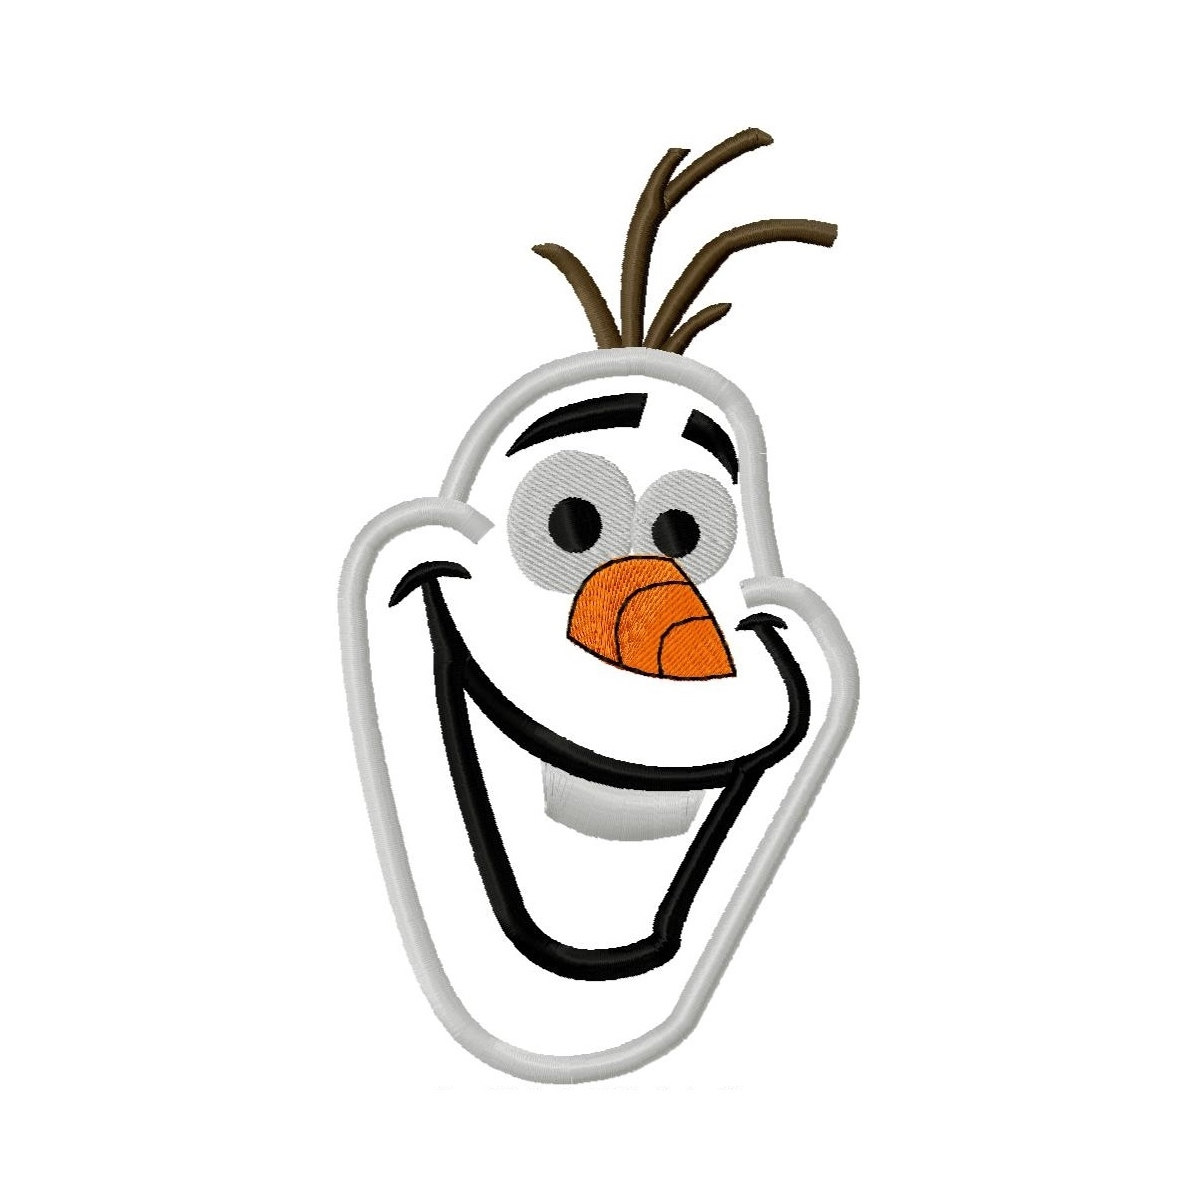 8 Best Images of Olaf The Snowman Face Printables Olaf Template